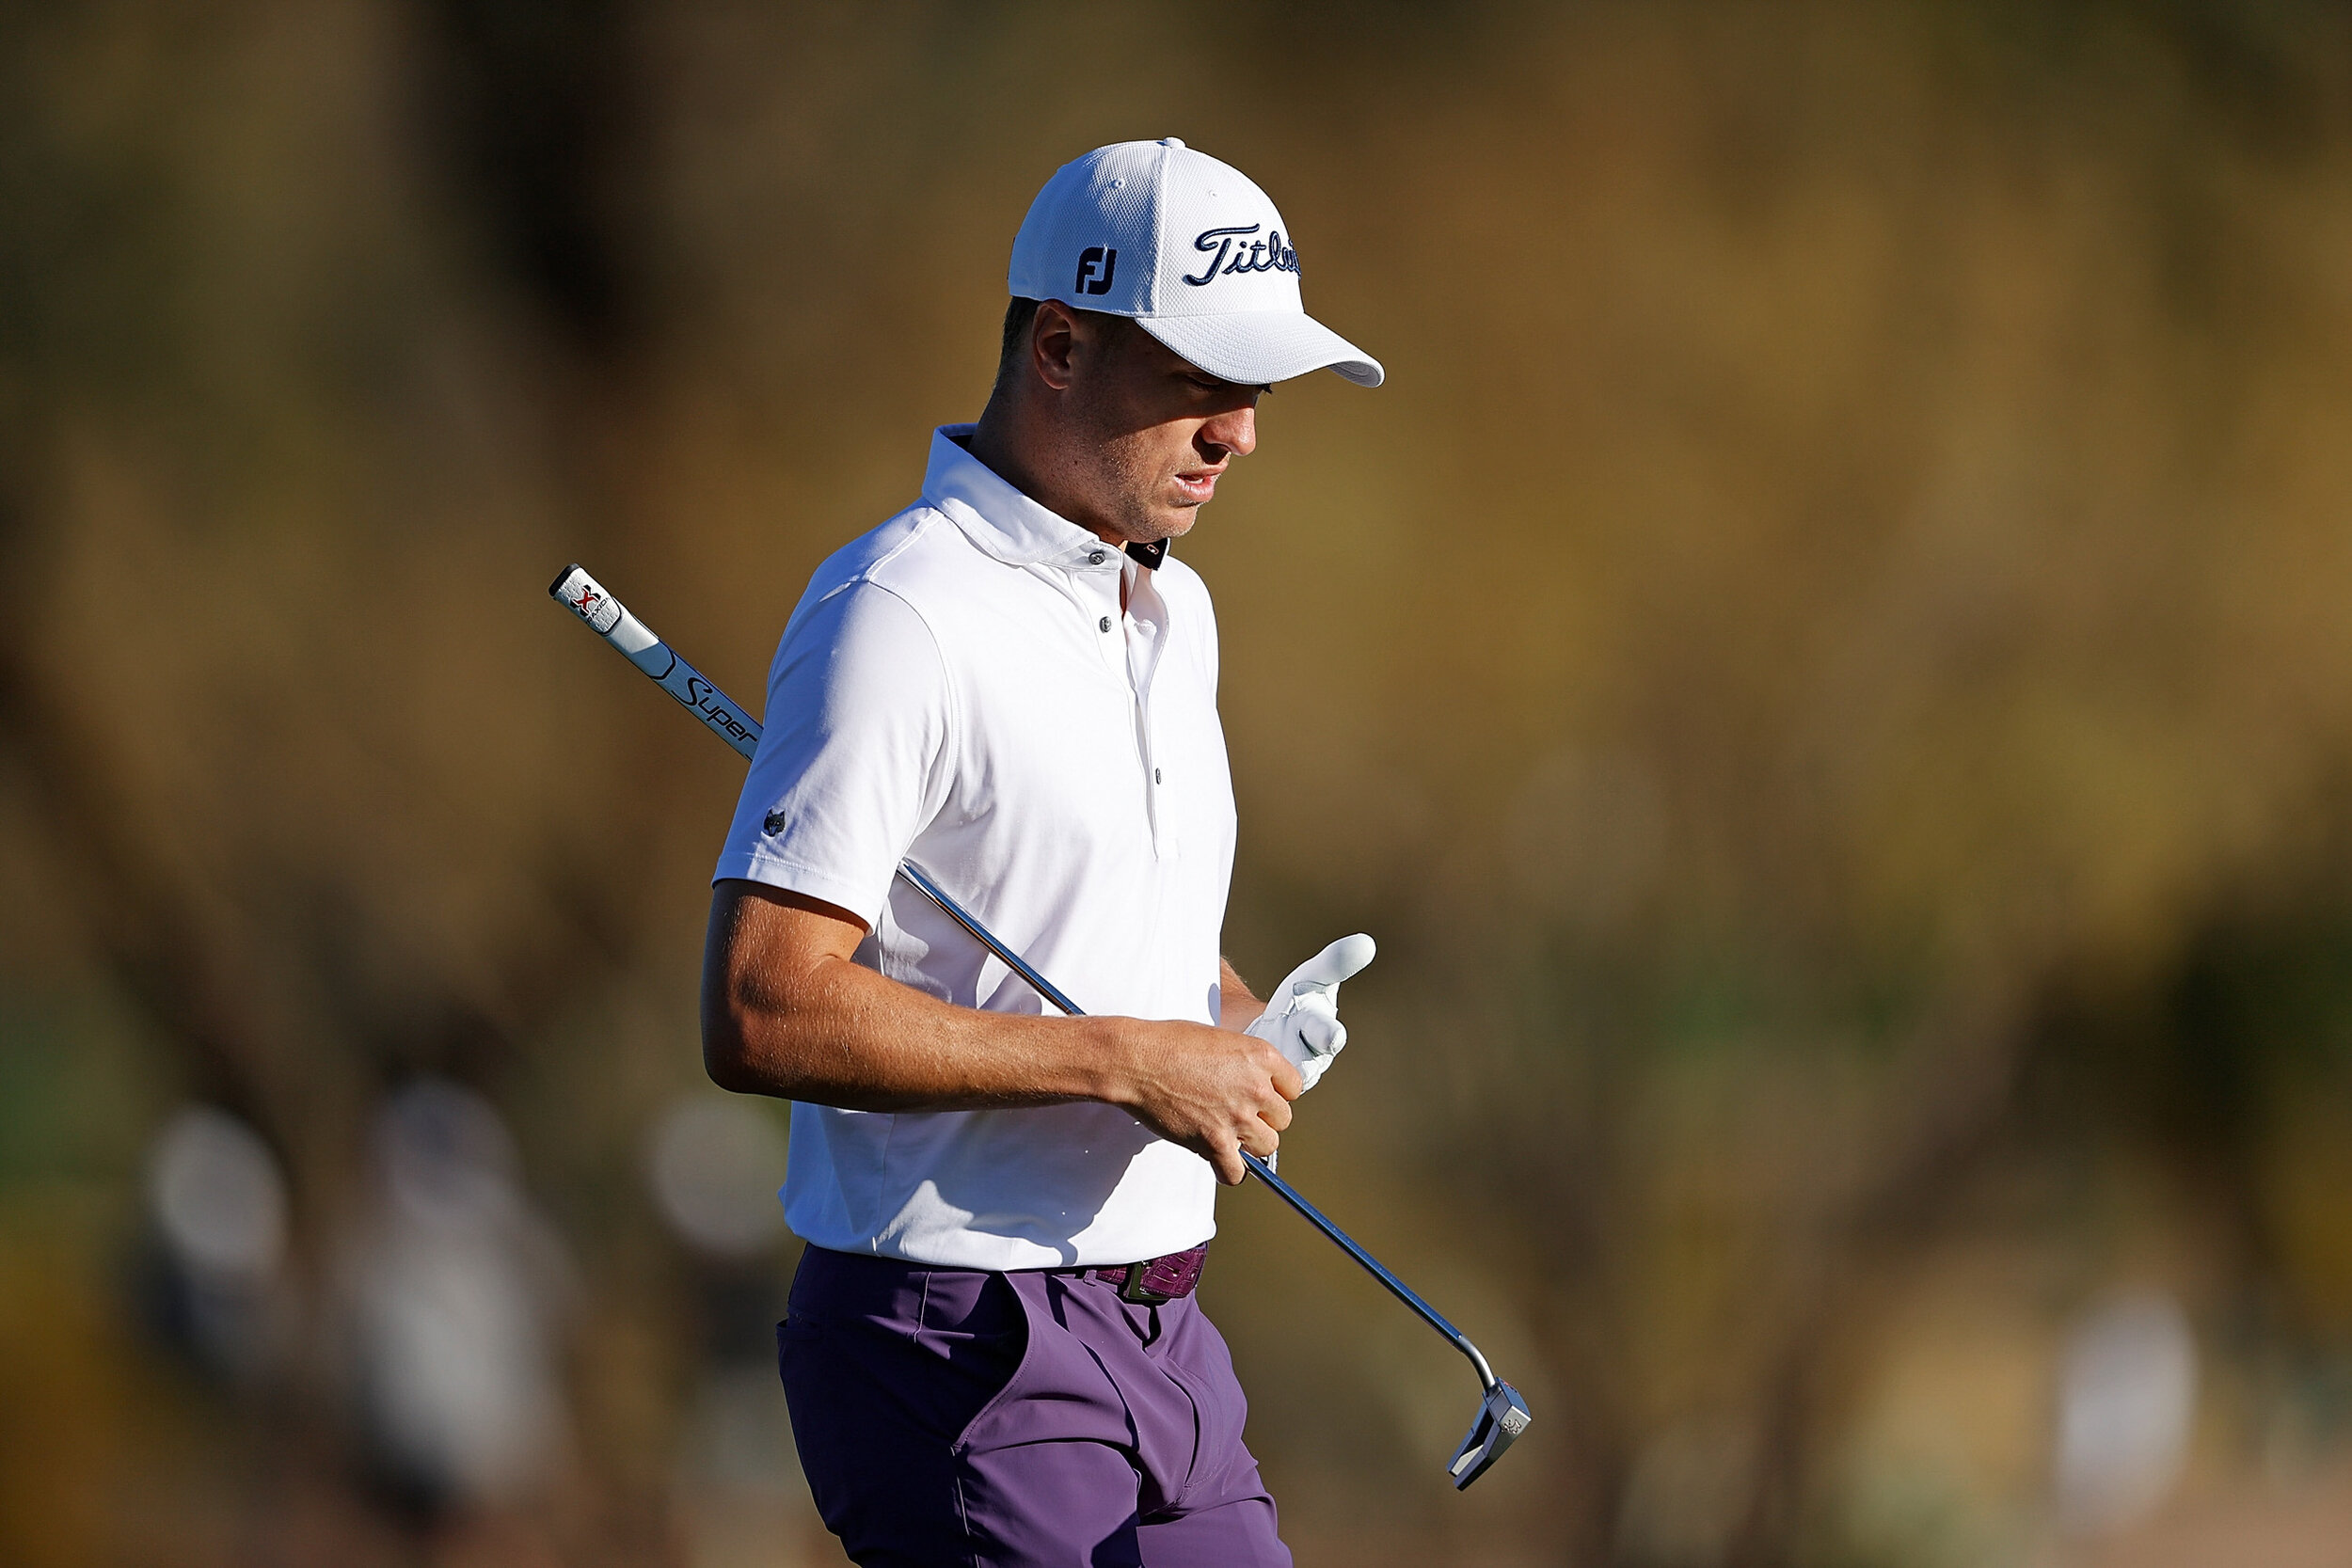  SCOTTSDALE, ARIZONA - FEBRUARY 05: Justin Thomas of the United States walks across the 14th green during the second round of the Waste Management Phoenix Open at TPC Scottsdale on February 05, 2021 in Scottsdale, Arizona. (Photo by Christian Peterse